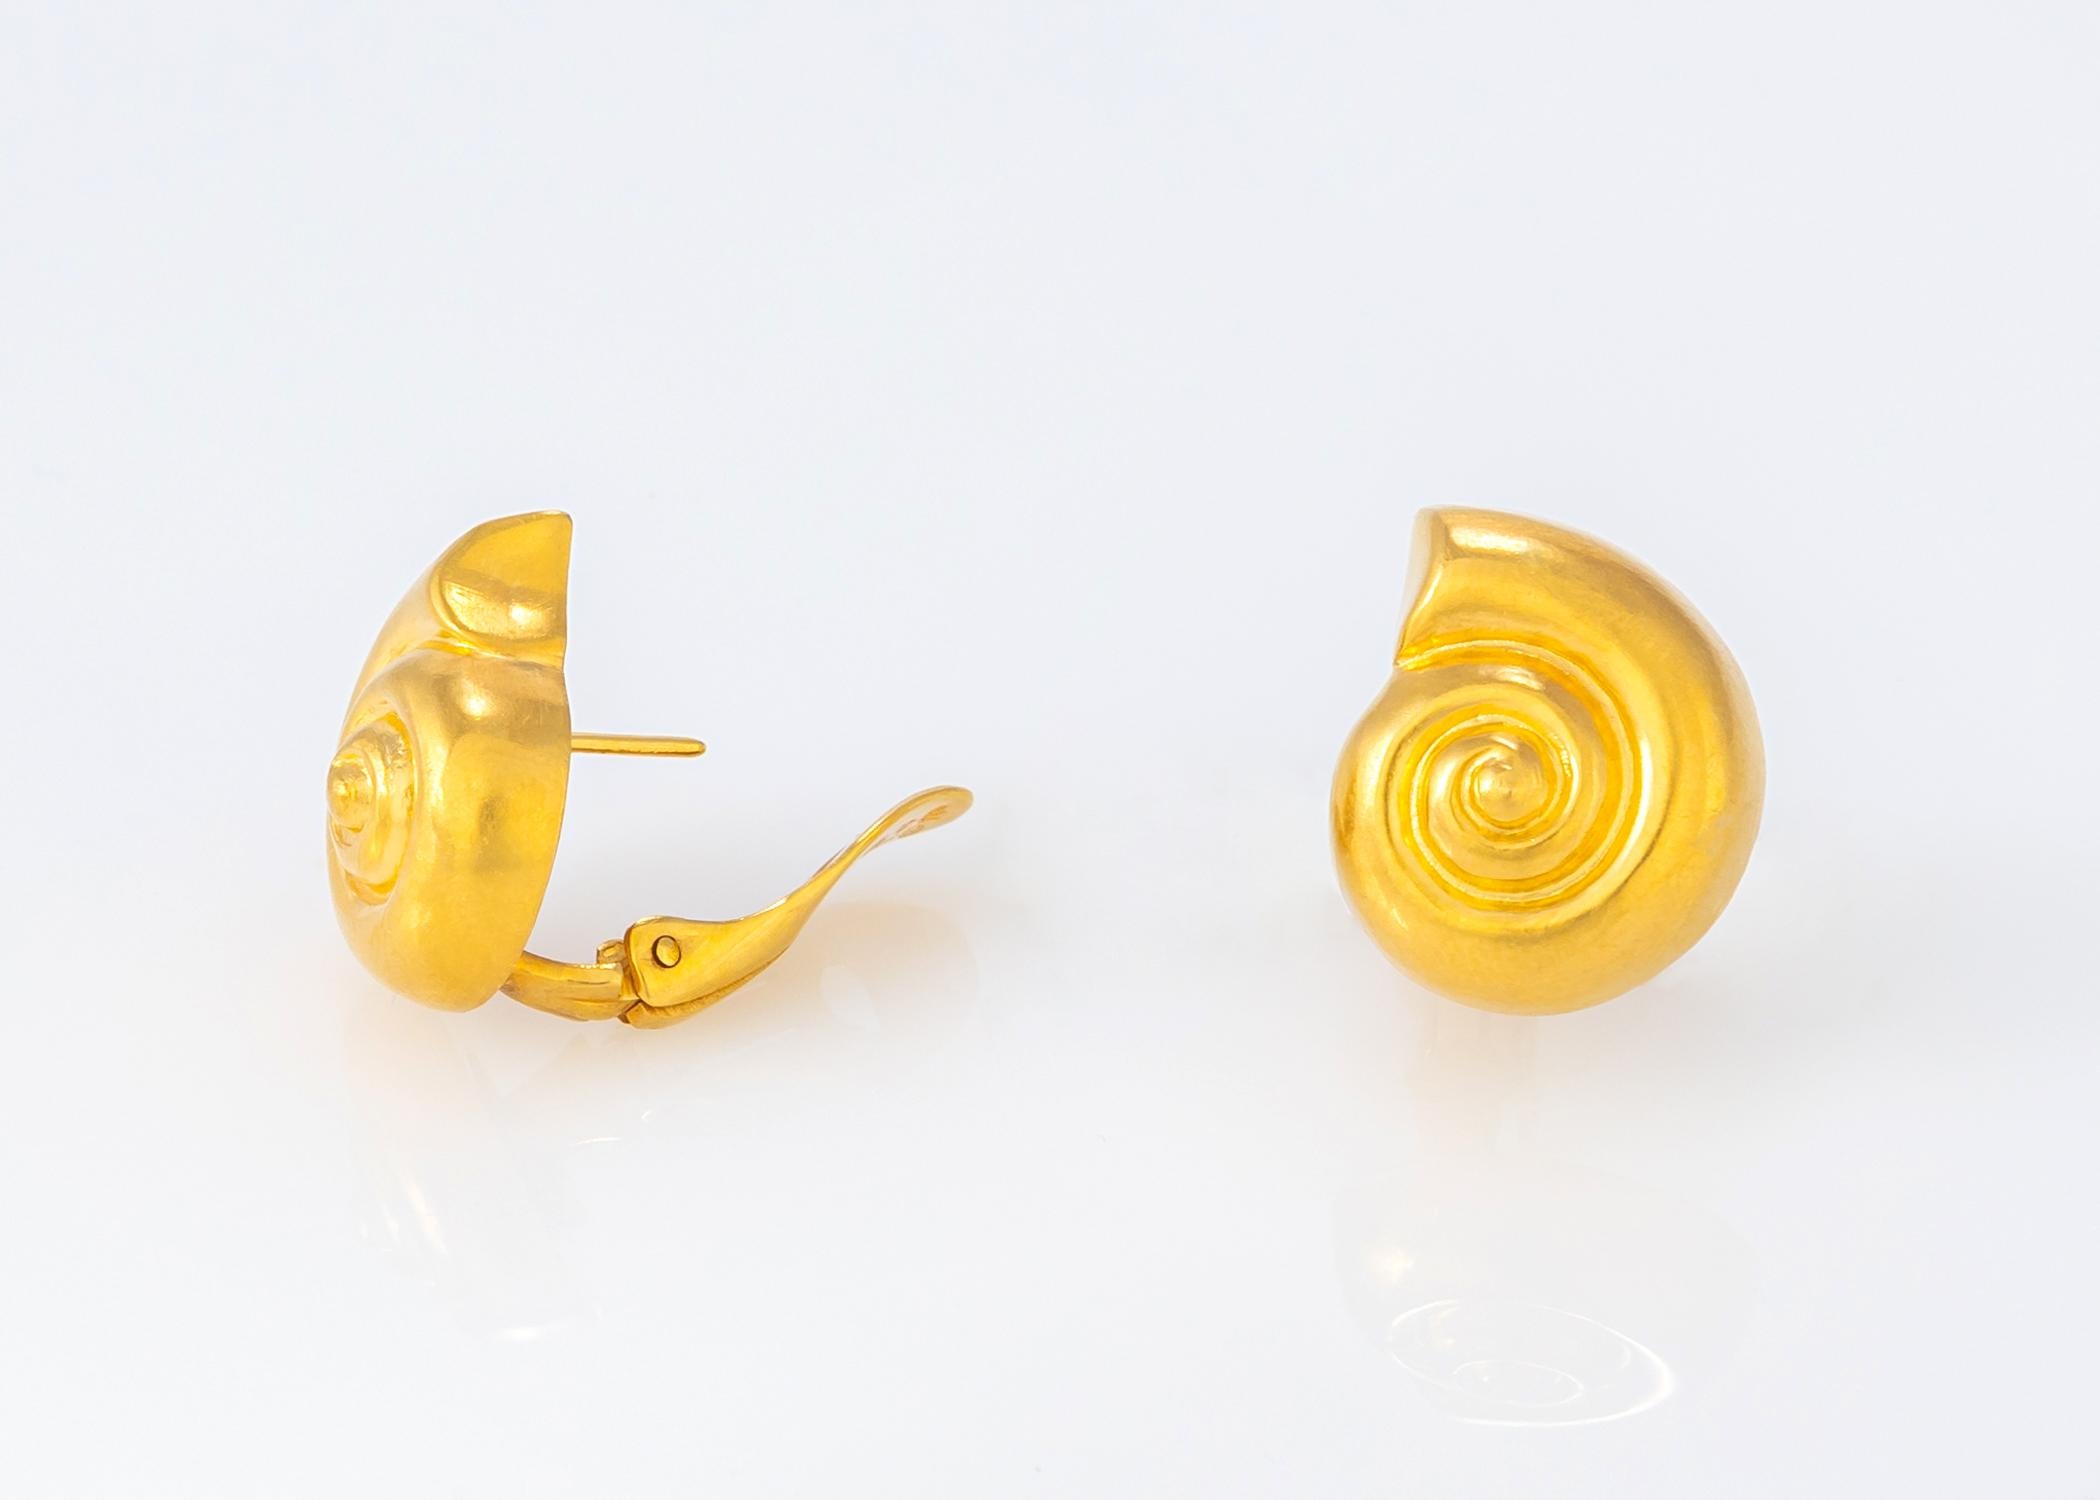 Greece is surrounded by the Aegean and Mediterranean Seas. Iconic Greek designer Ilias Lalaounis draws inspiration from just that when creating this simple easy to wear shell earring. At just over 3/4's of an inch this can be your new go to gold